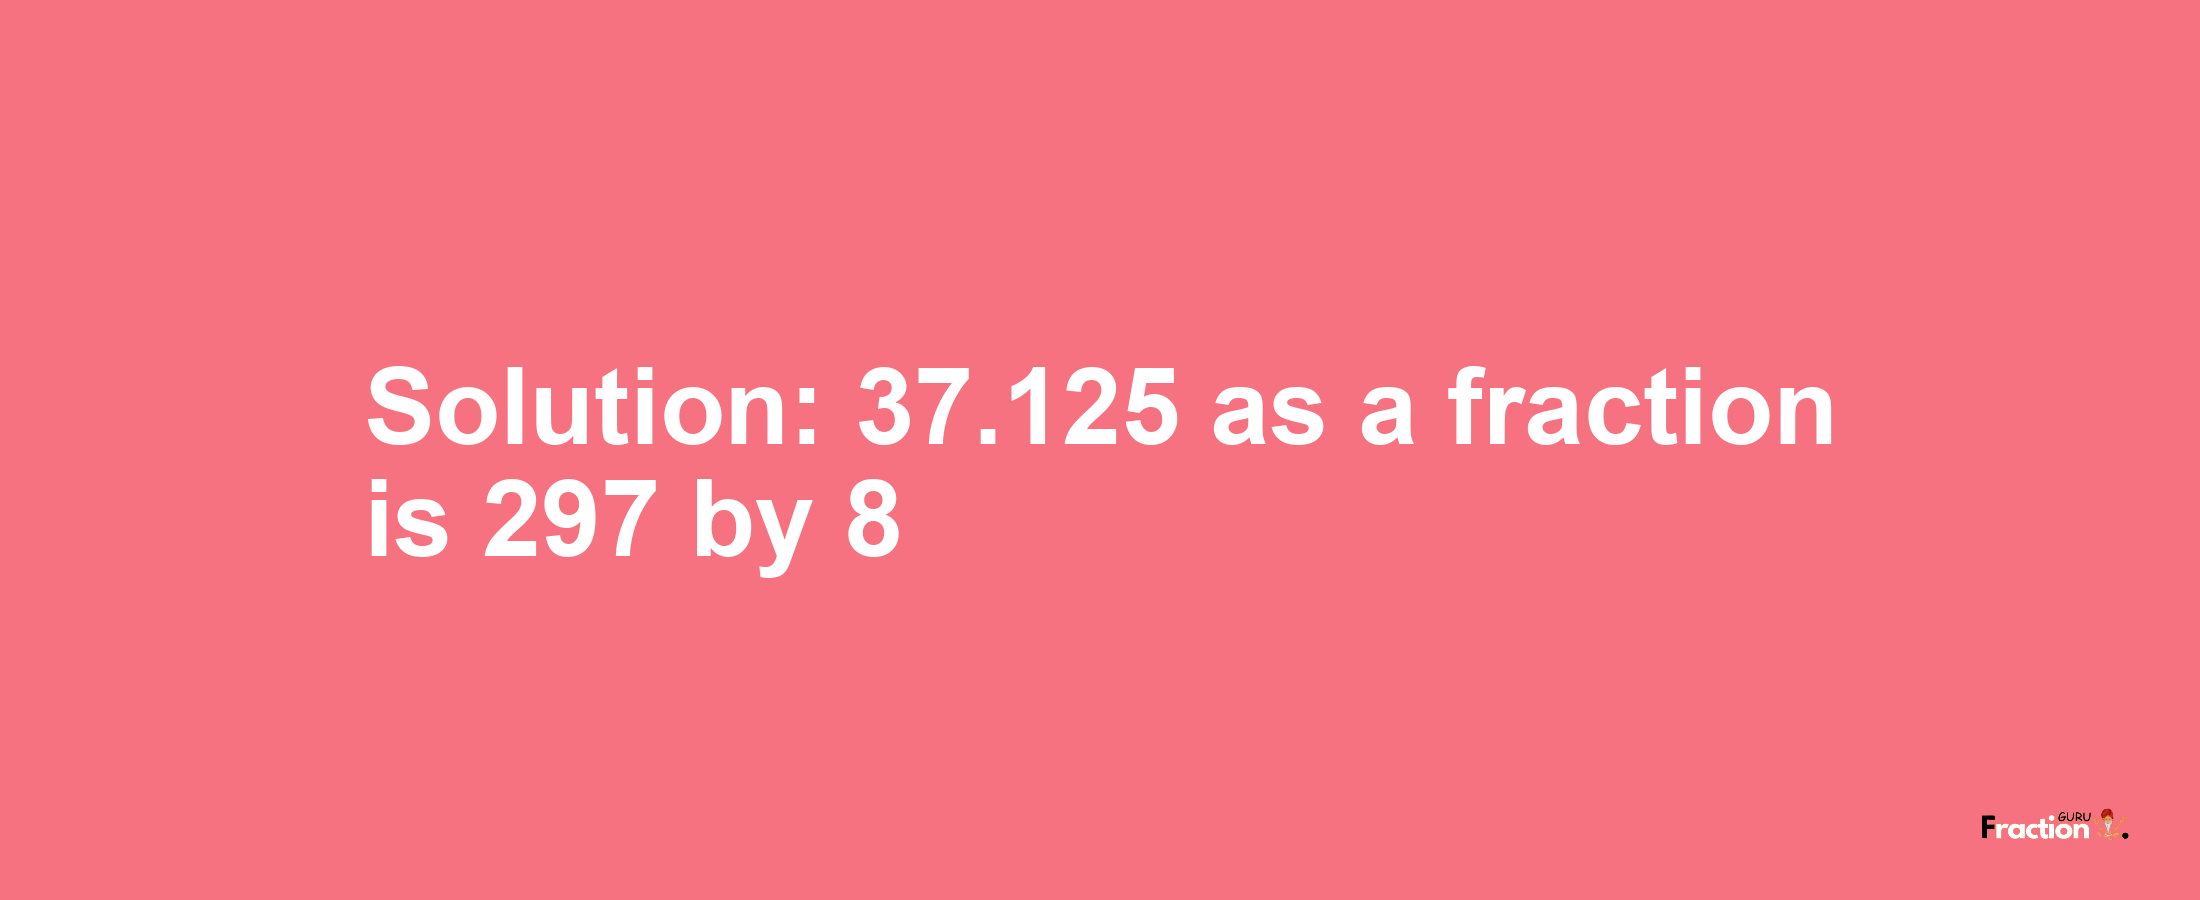 Solution:37.125 as a fraction is 297/8